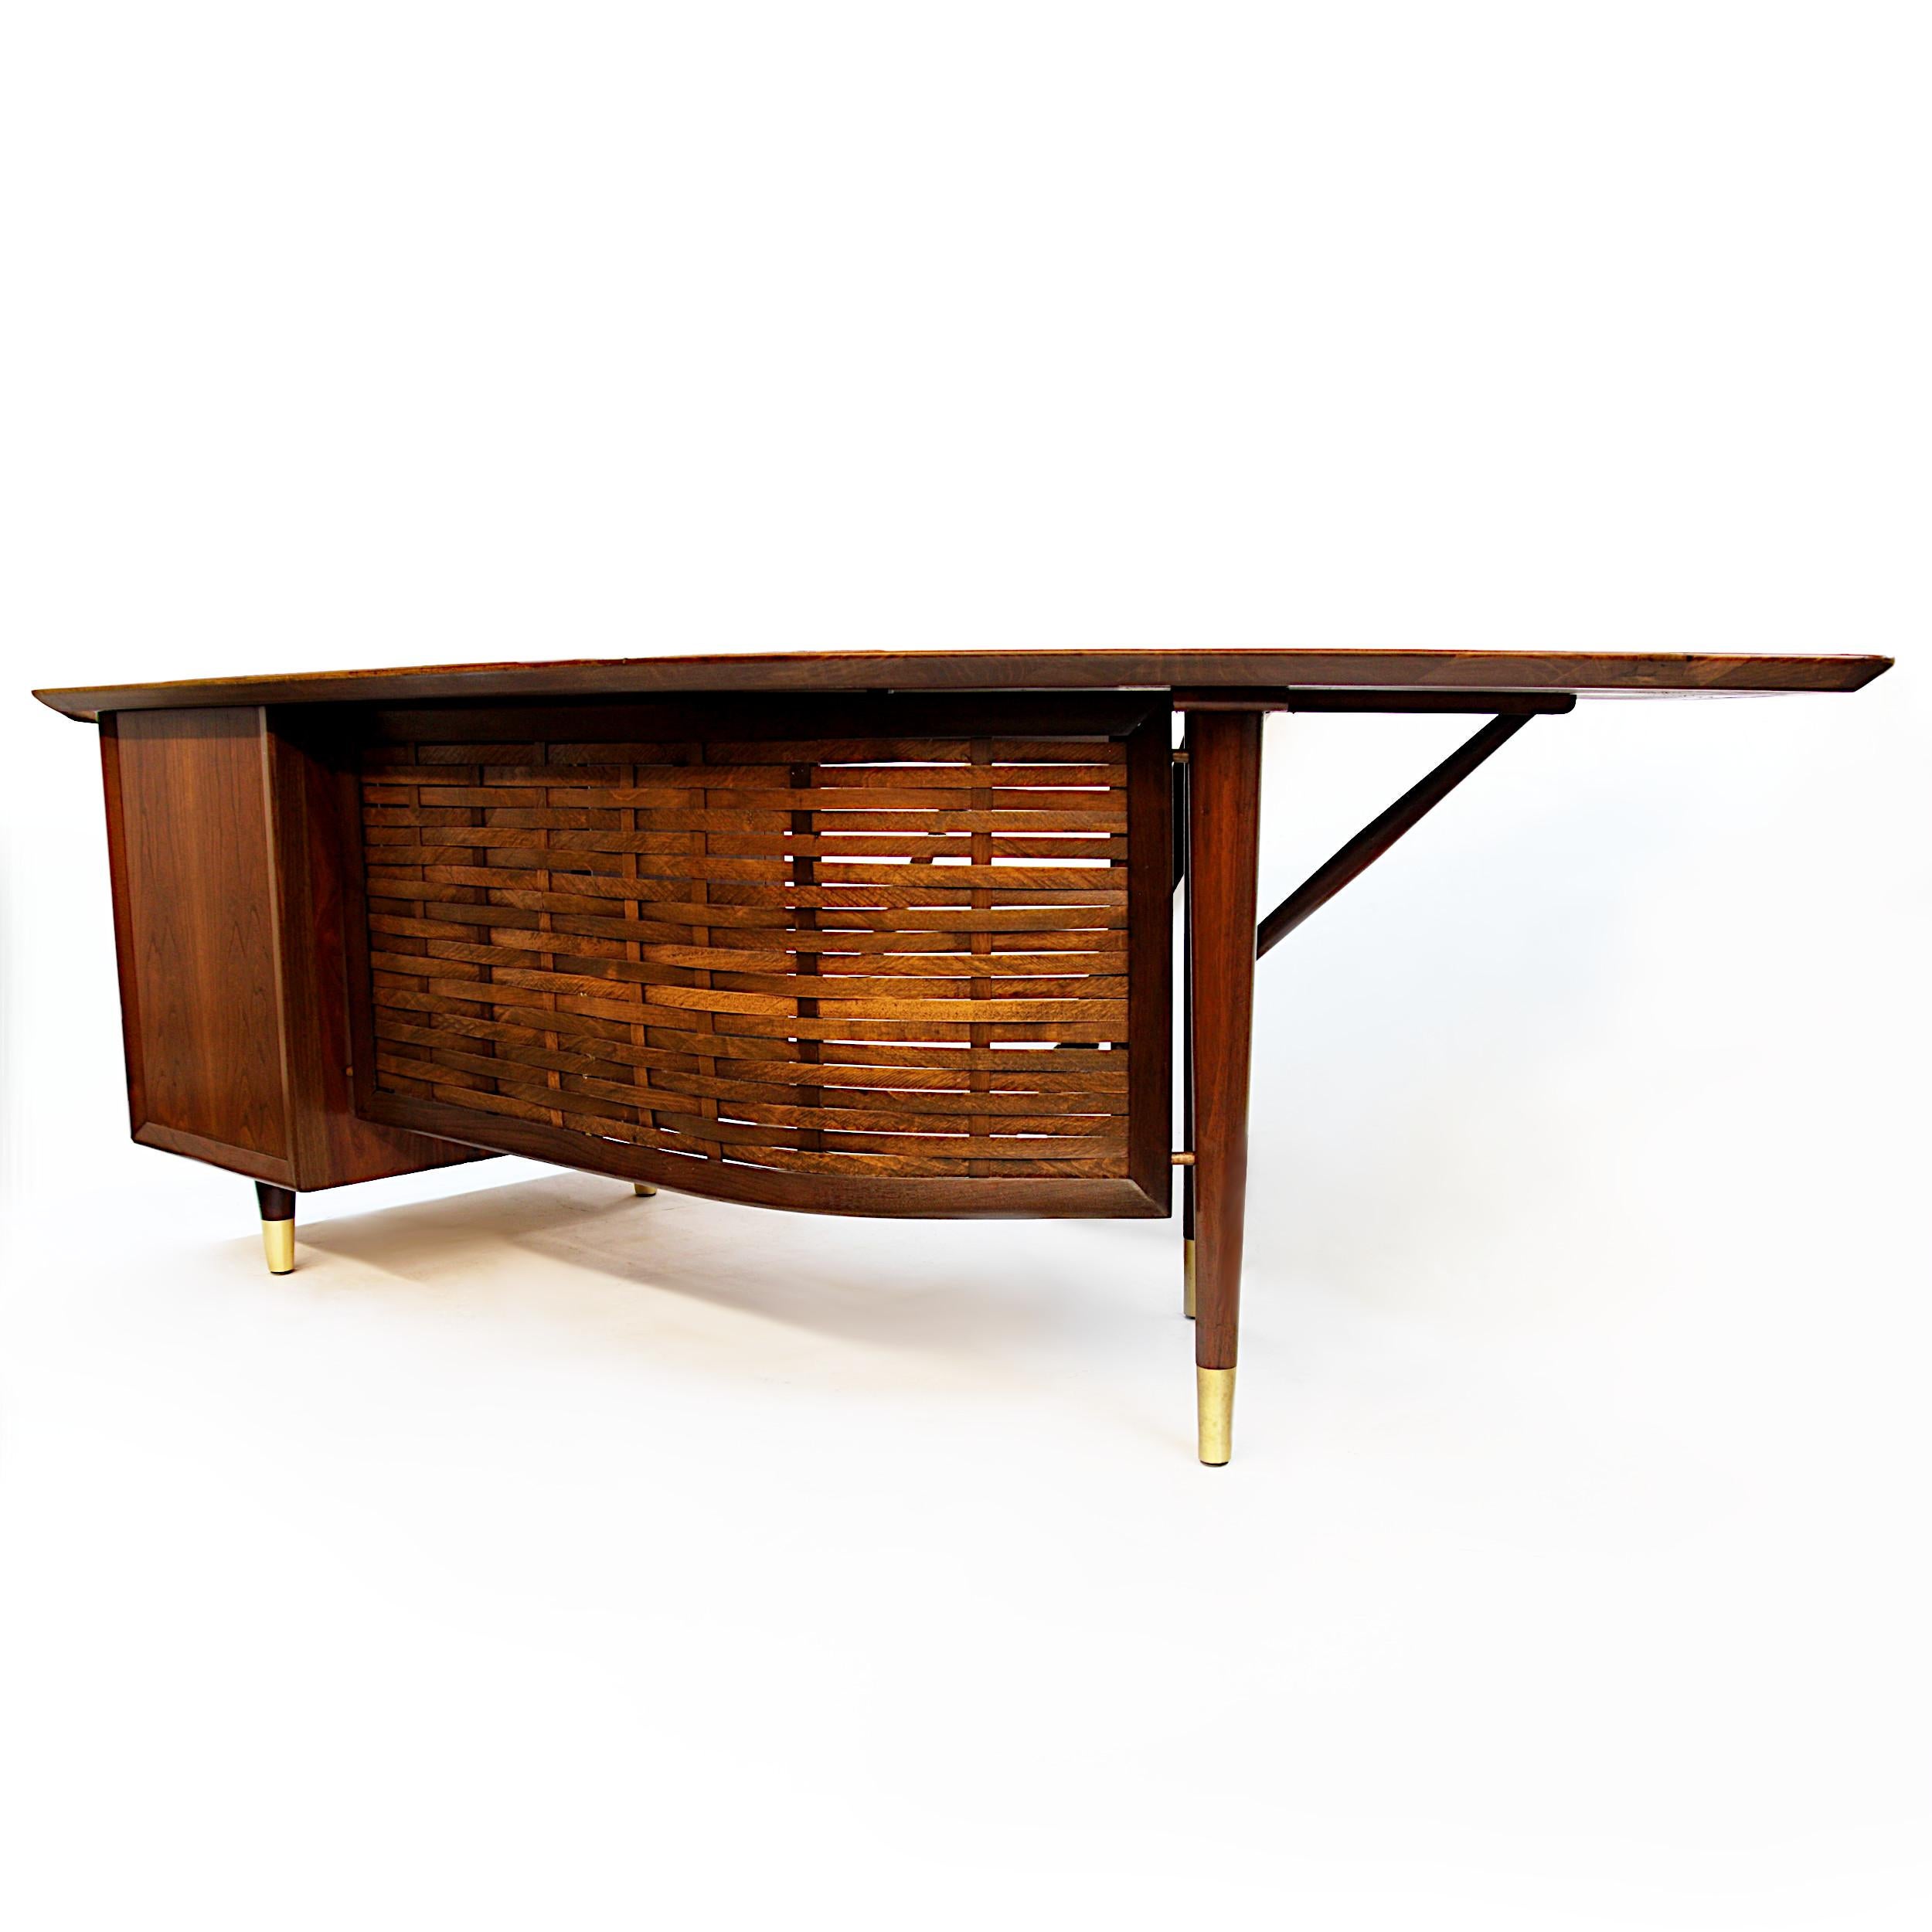 Amazing Mid-Century Modern executive desk by the Alma Desk Company. Desk features unique, curved, 